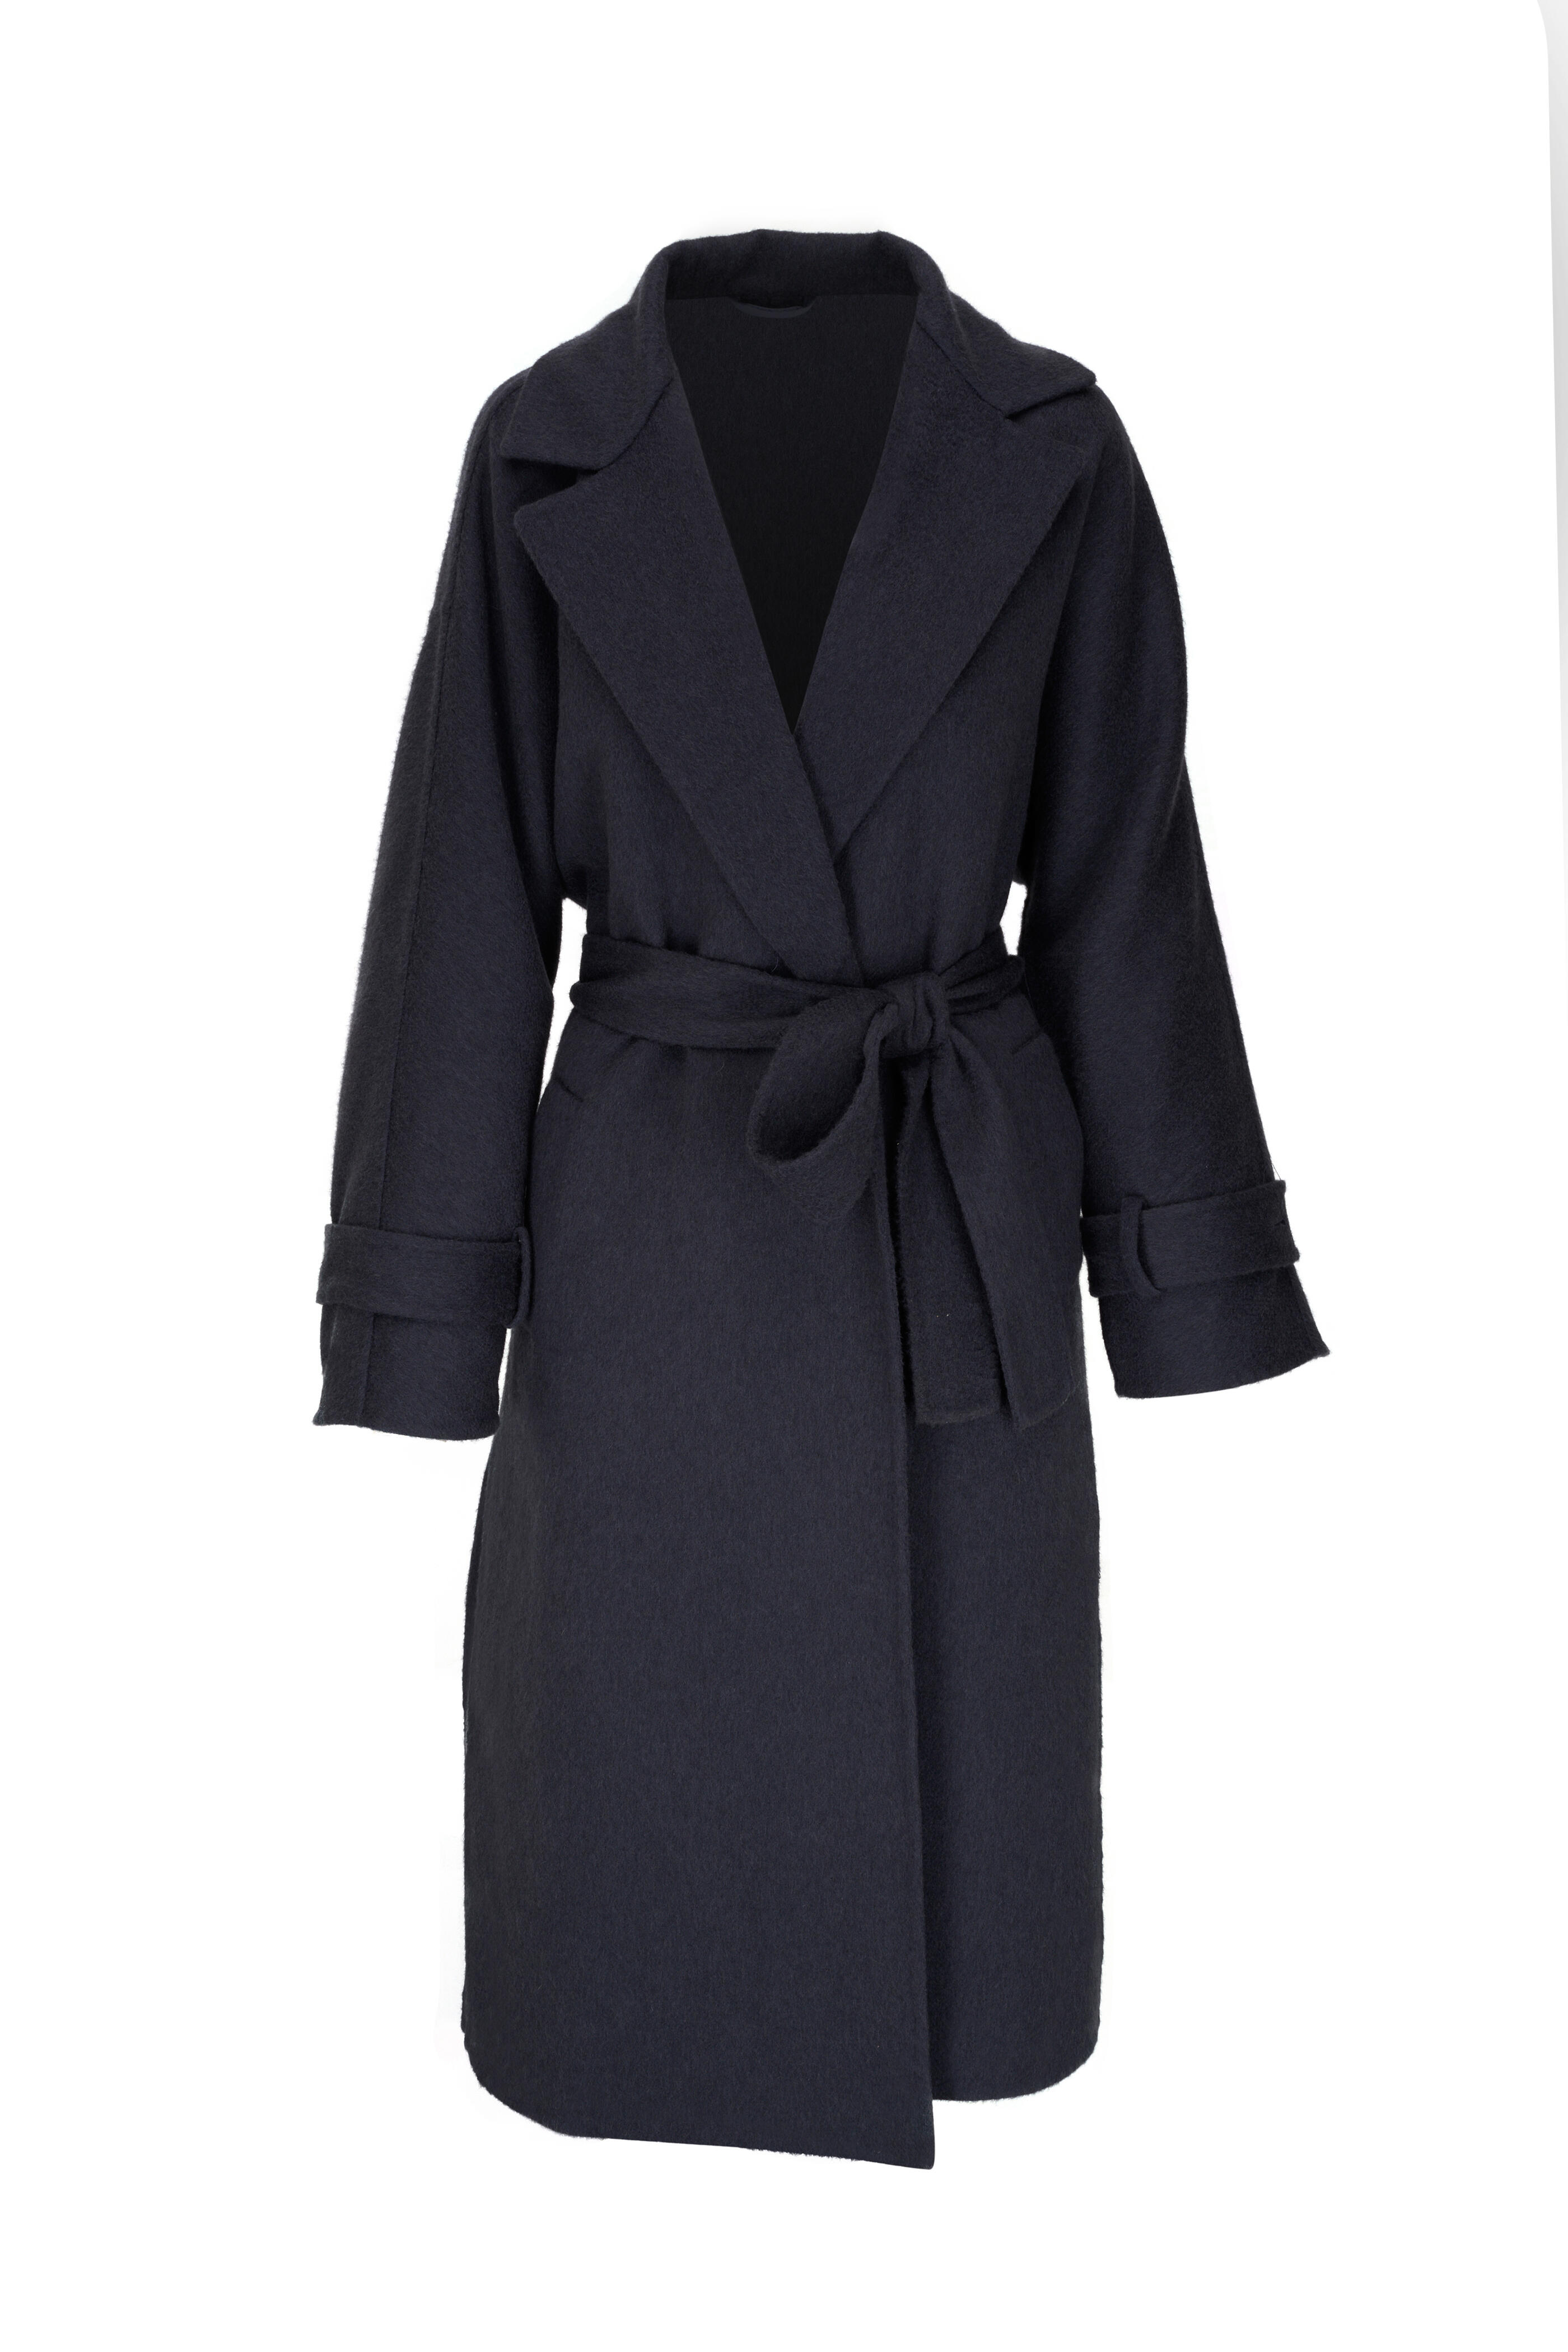 Brunello Cucinelli - Navy Blue Cashmere Long Belted Overcoat